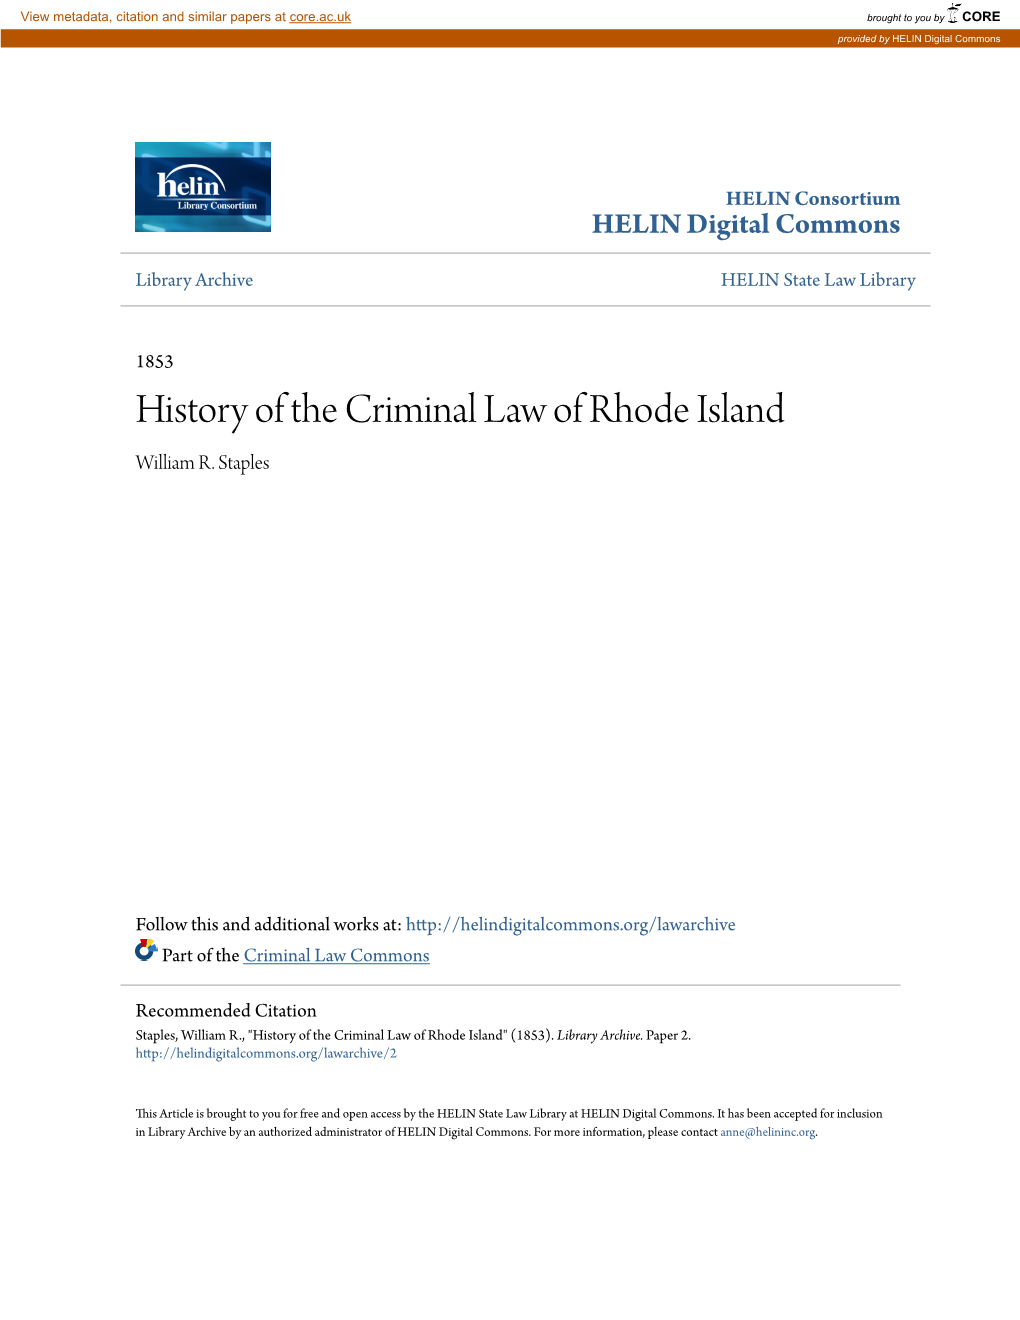 History of the Criminal Law of Rhode Island William R